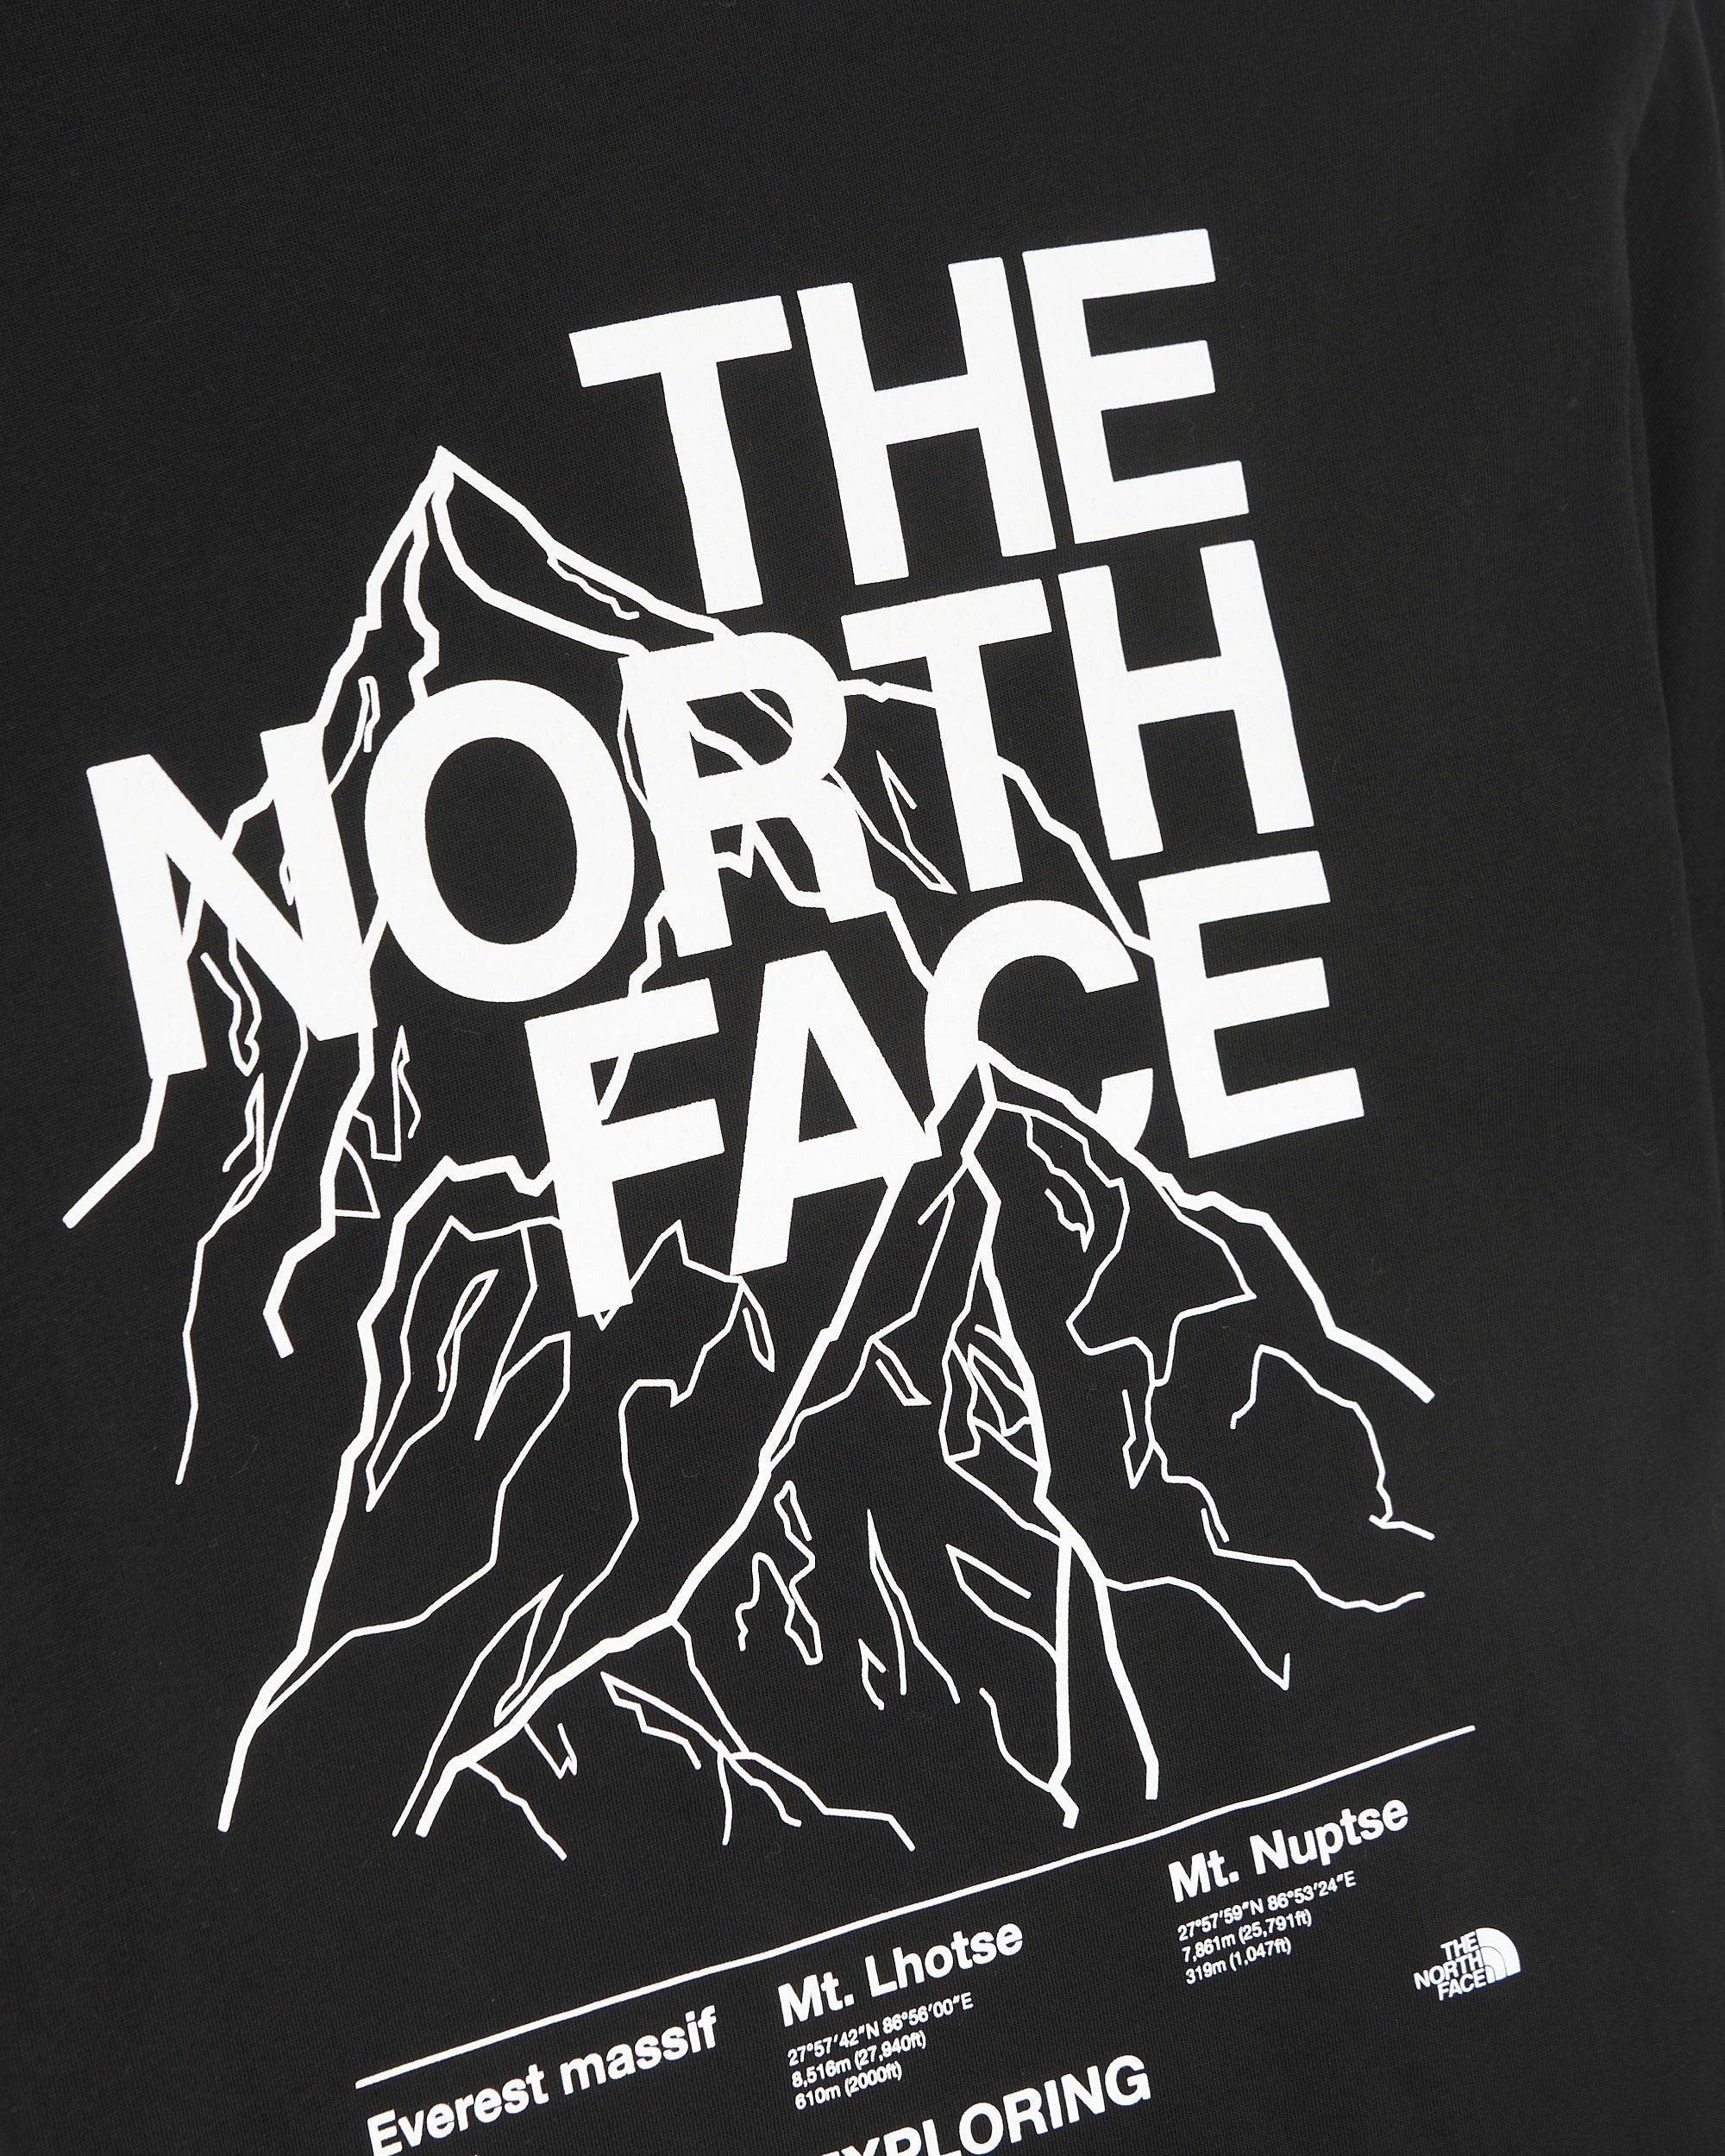 Camiseta The North Face s/s Mount Out Negro